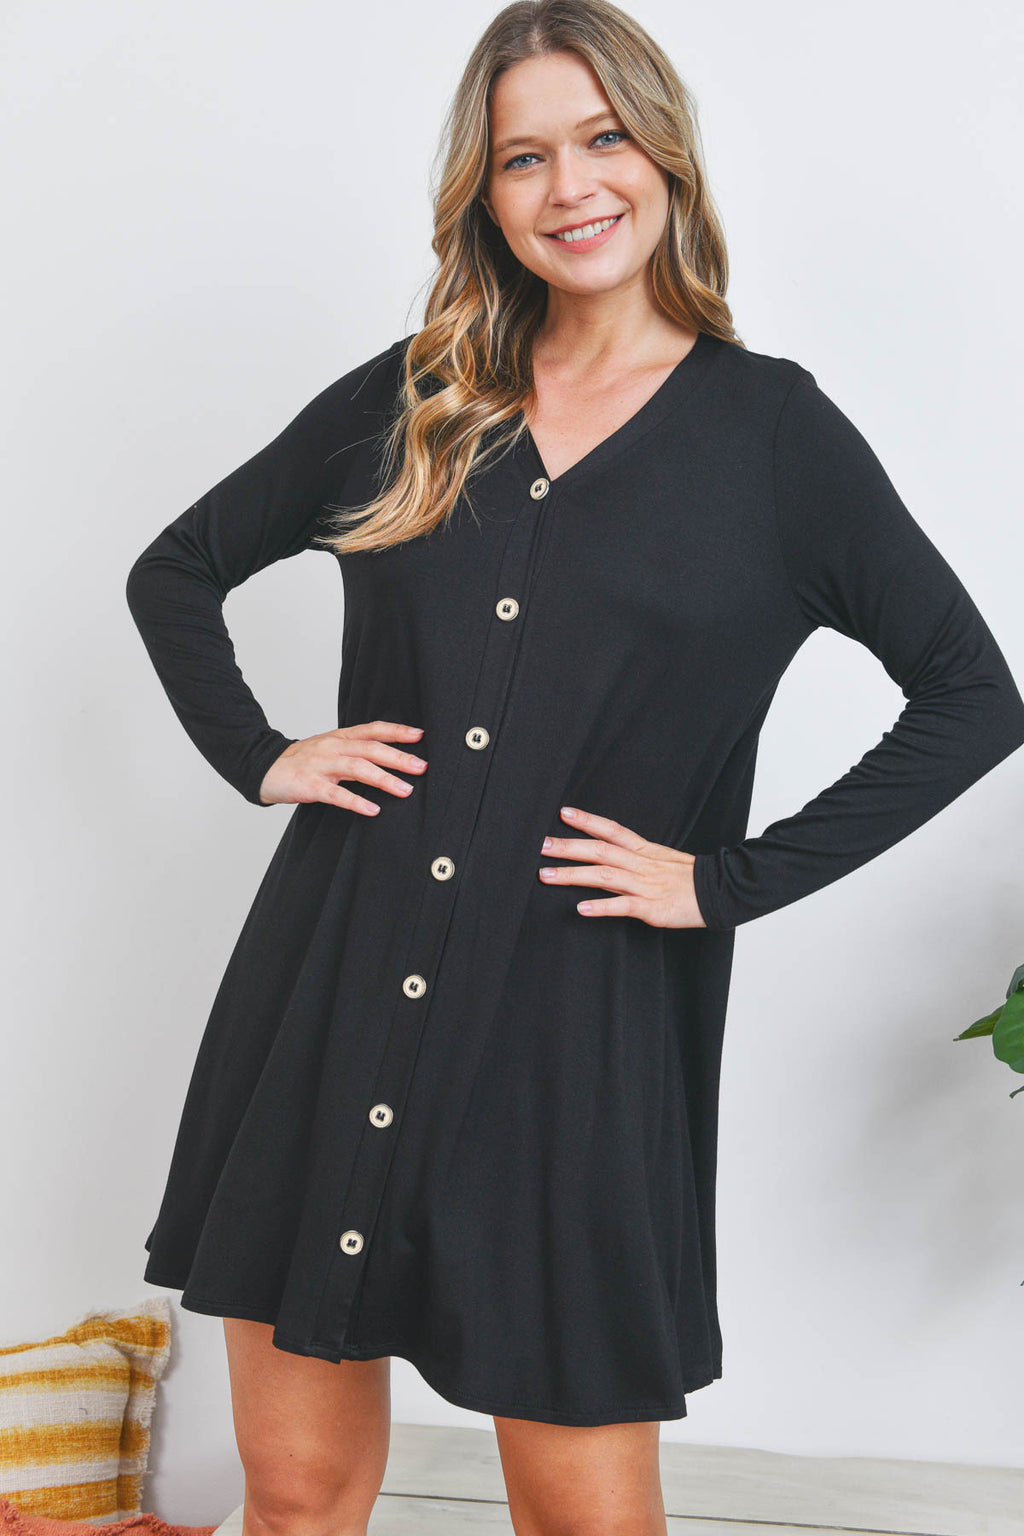 Long Sleeve v neck button down casual black dress